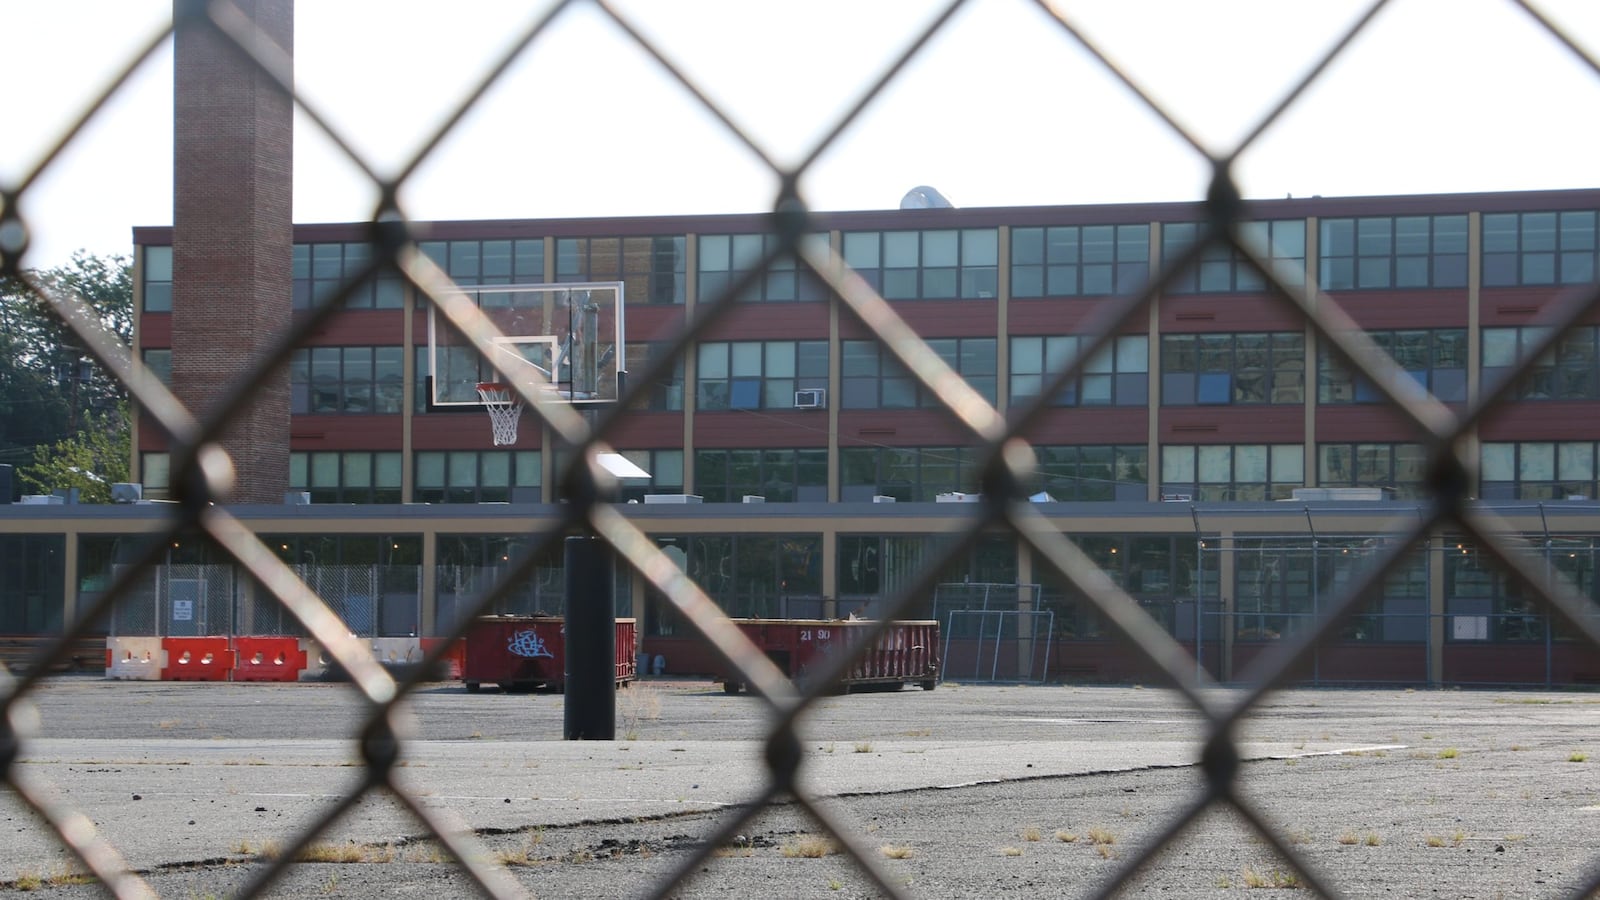 A building is seen behind a chain-link fence.